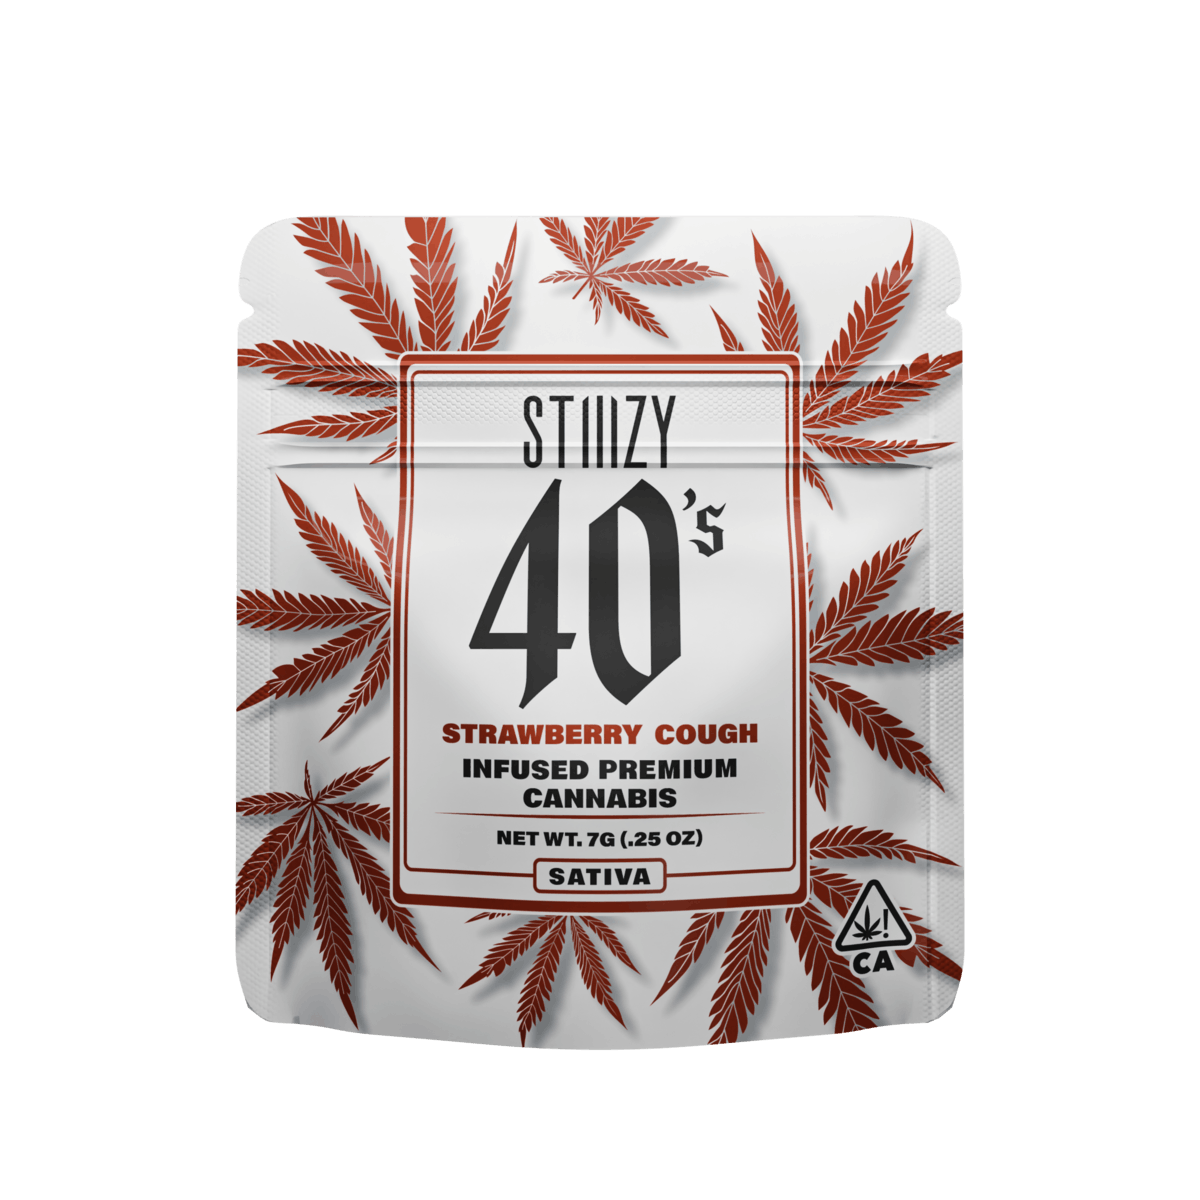 STIIIZY Infused 40s Flower - 7G Strawberry Cough